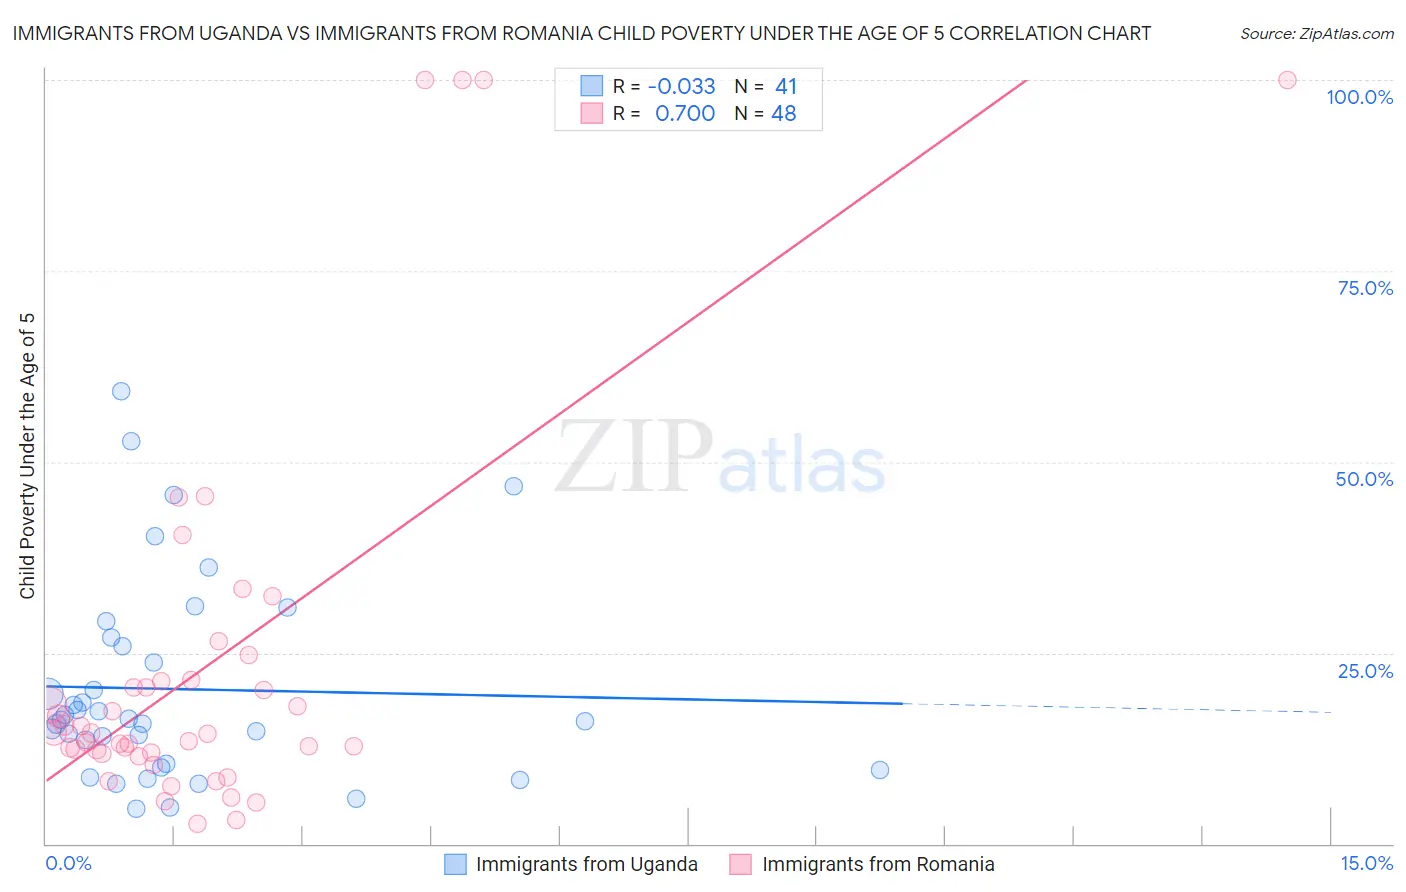 Immigrants from Uganda vs Immigrants from Romania Child Poverty Under the Age of 5